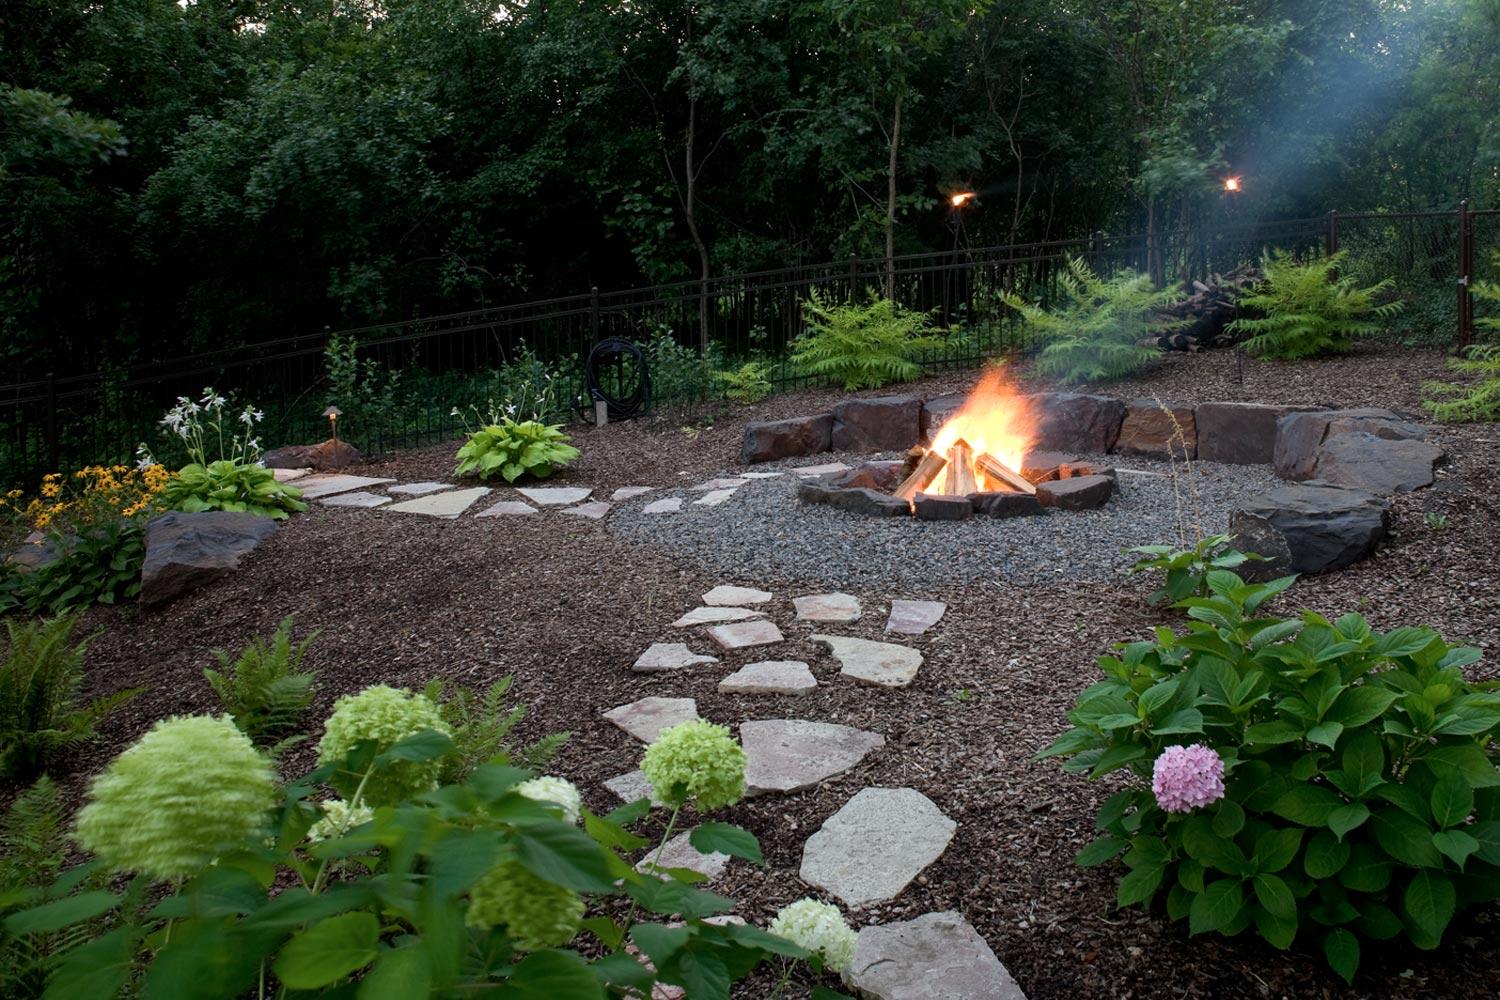 Flagstone paver walkways leading to an in-ground fire pit surrounded by crushed gravel.